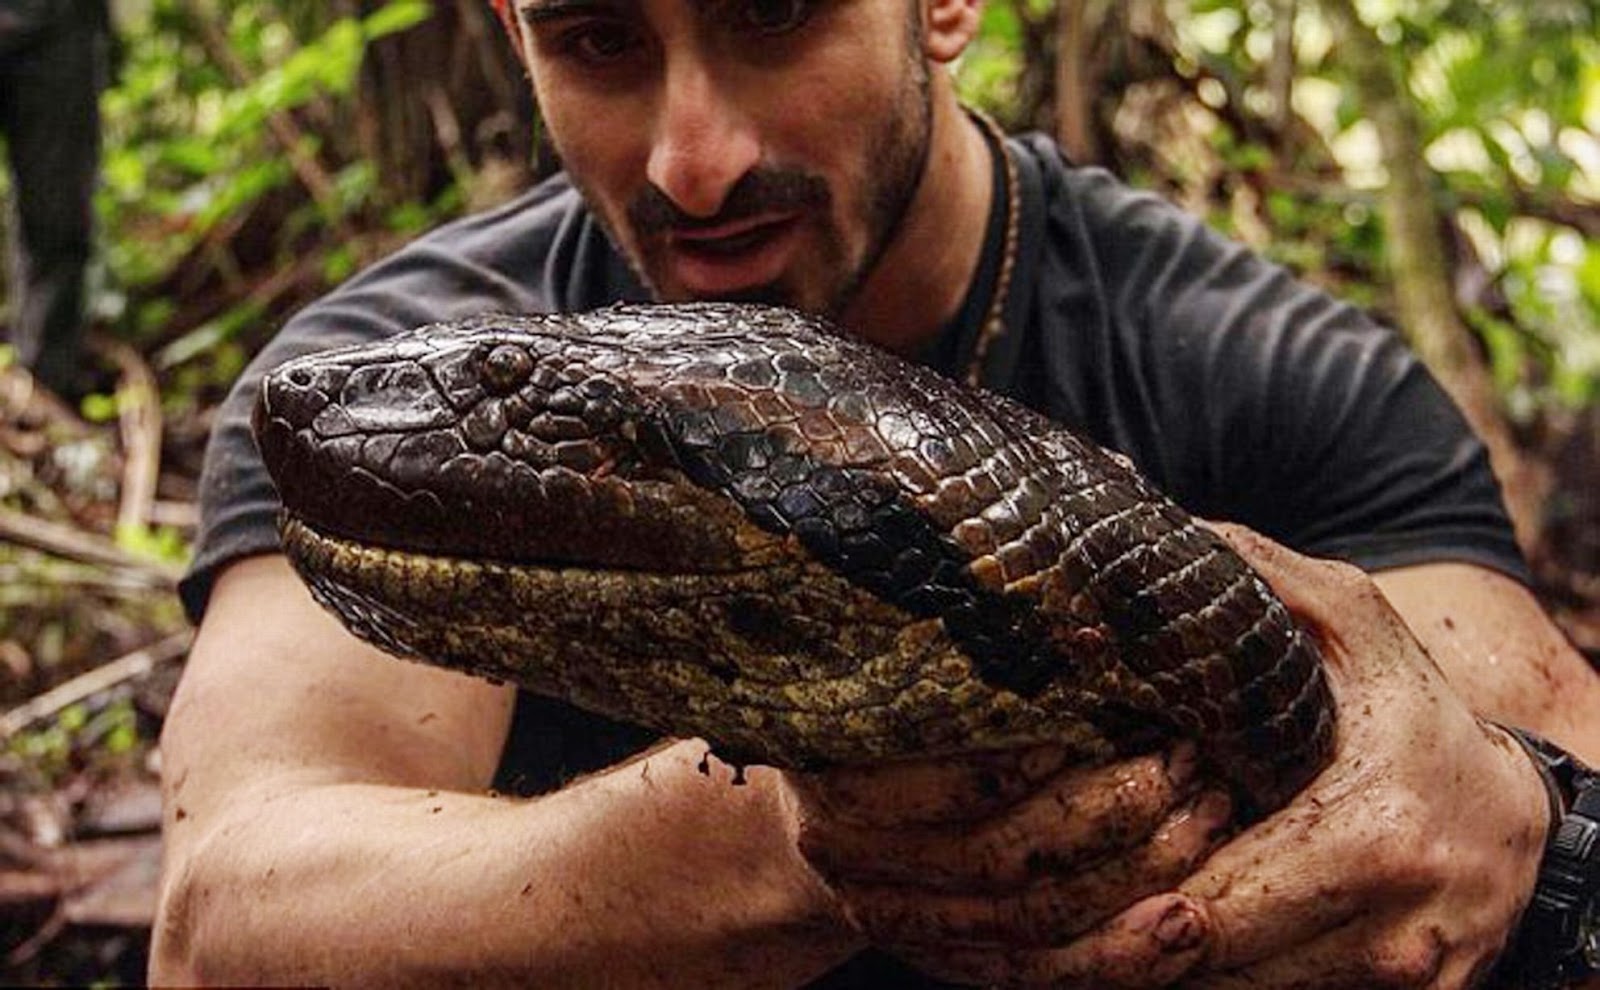 Paul Rosolie fails to get Eaten Alive by an anaconda.